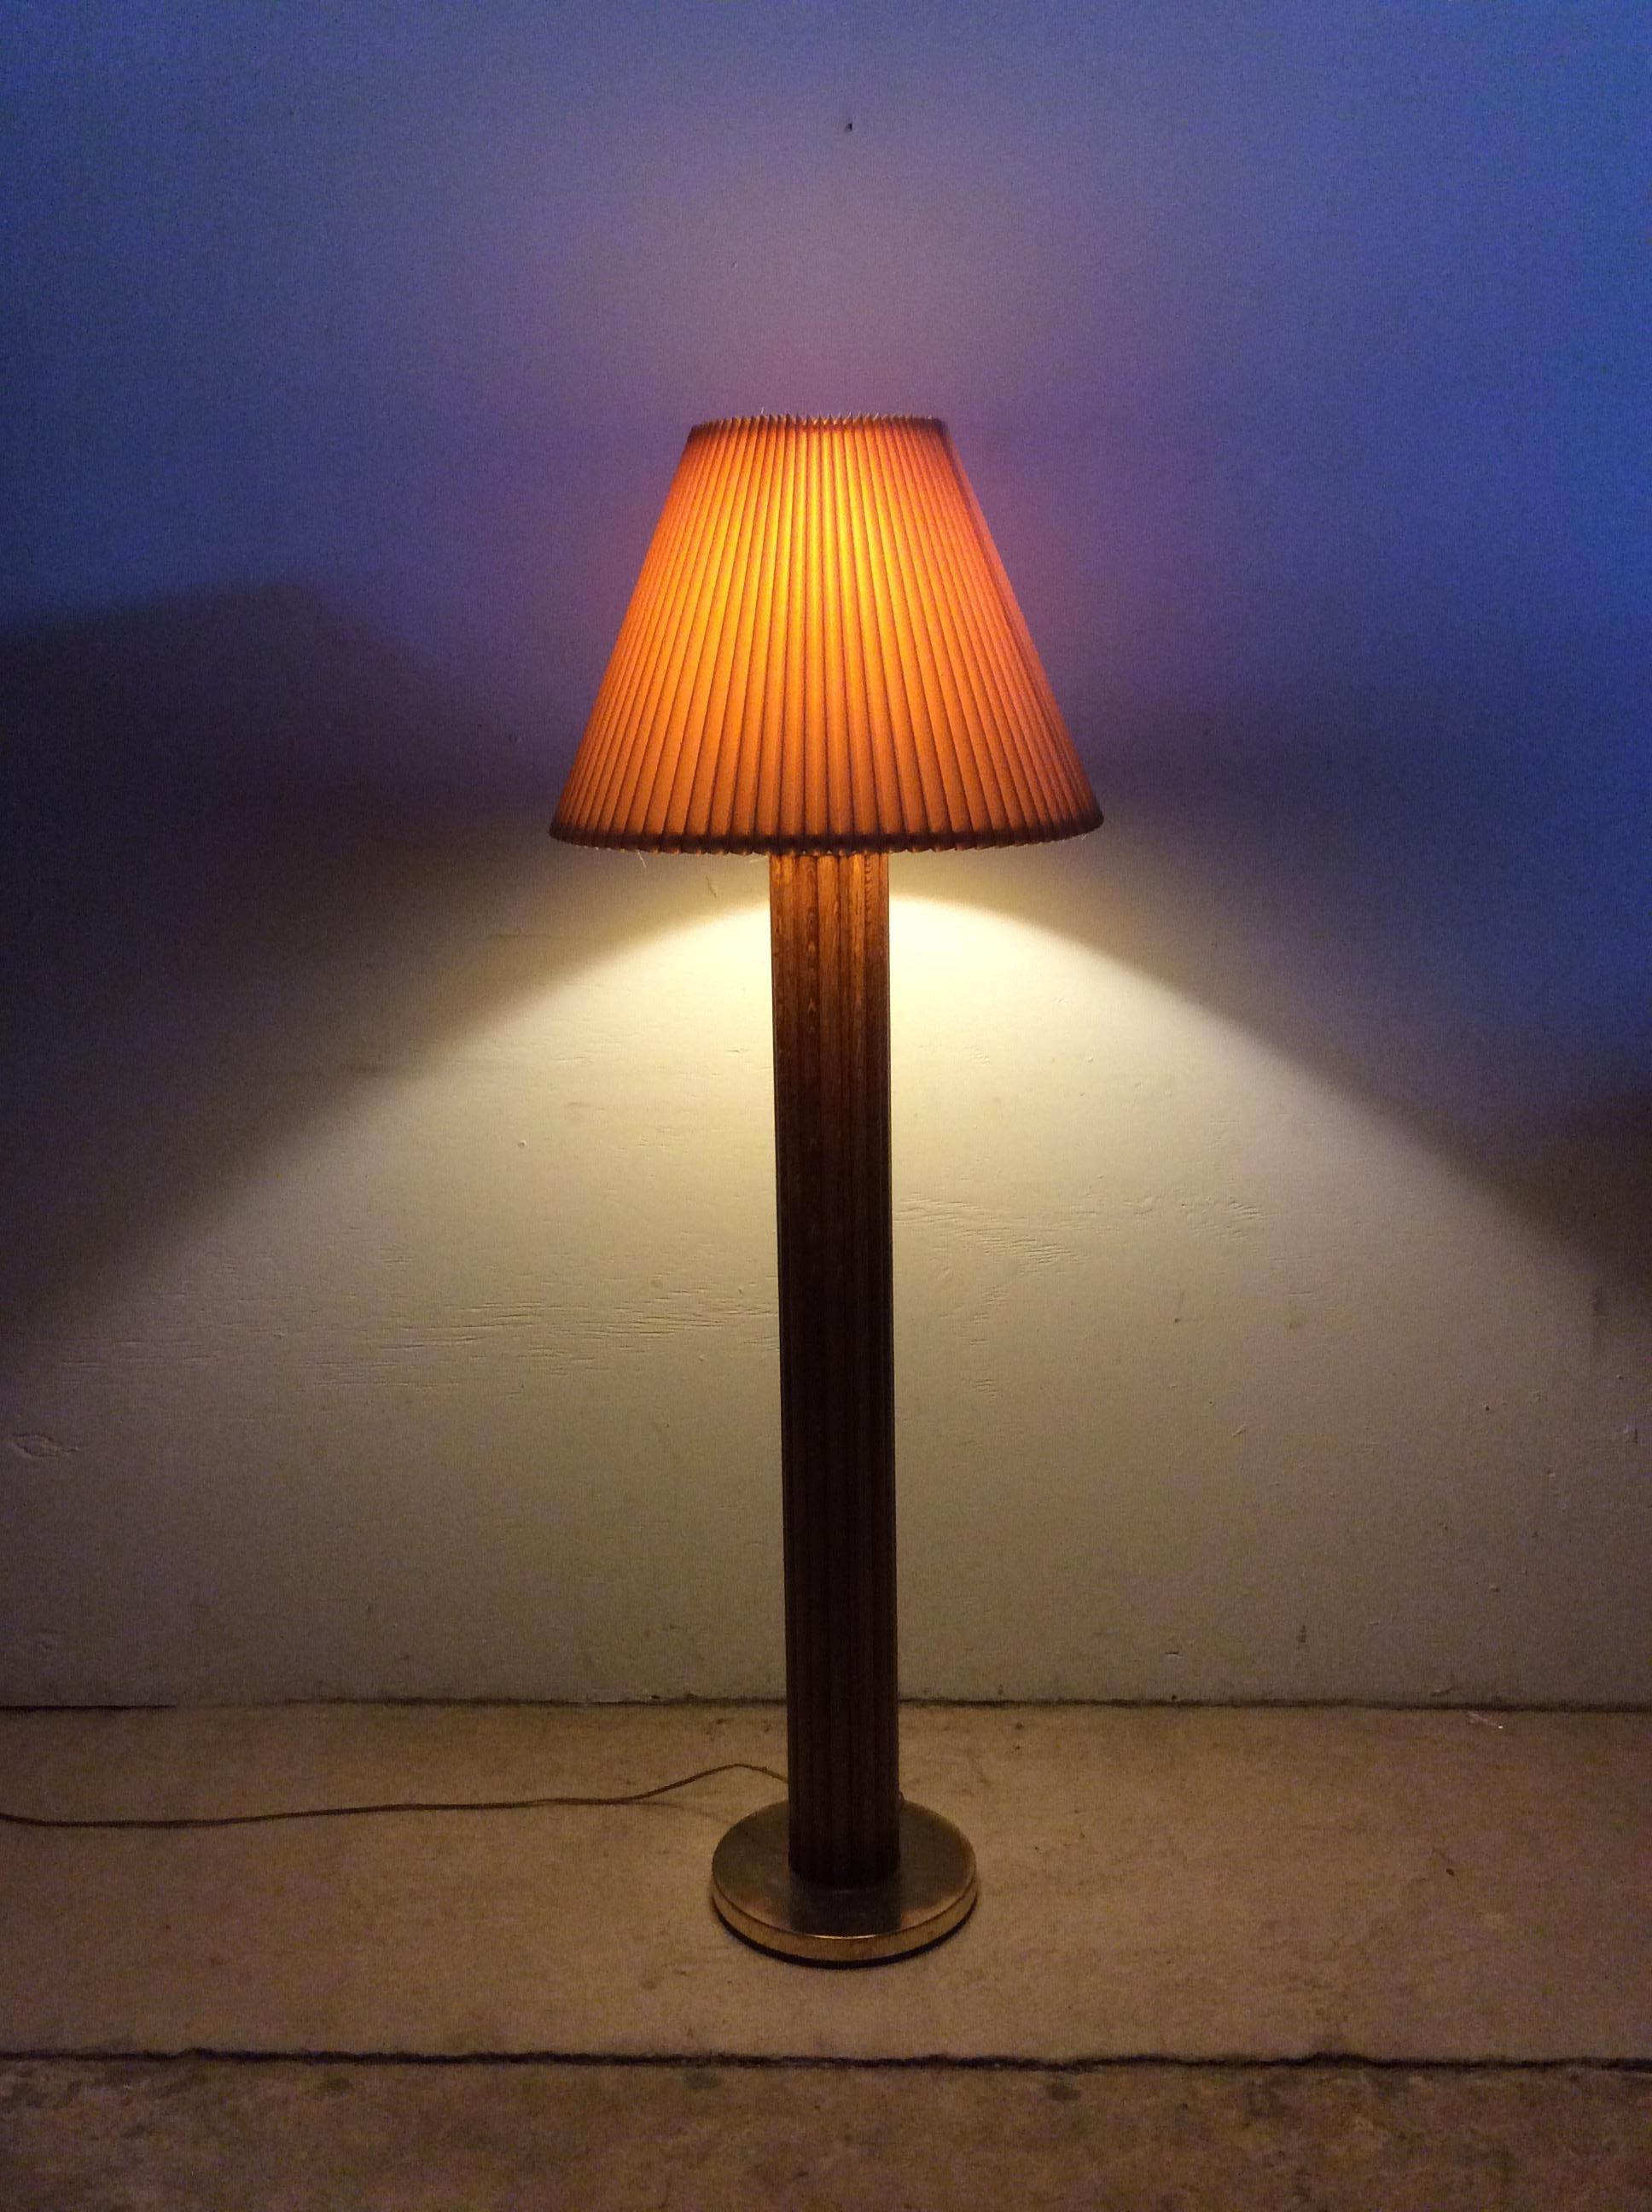 Vintage Boho Chic Rattan Floor Lamp with Pleated Shade In Good Condition For Sale In Freehold, NJ